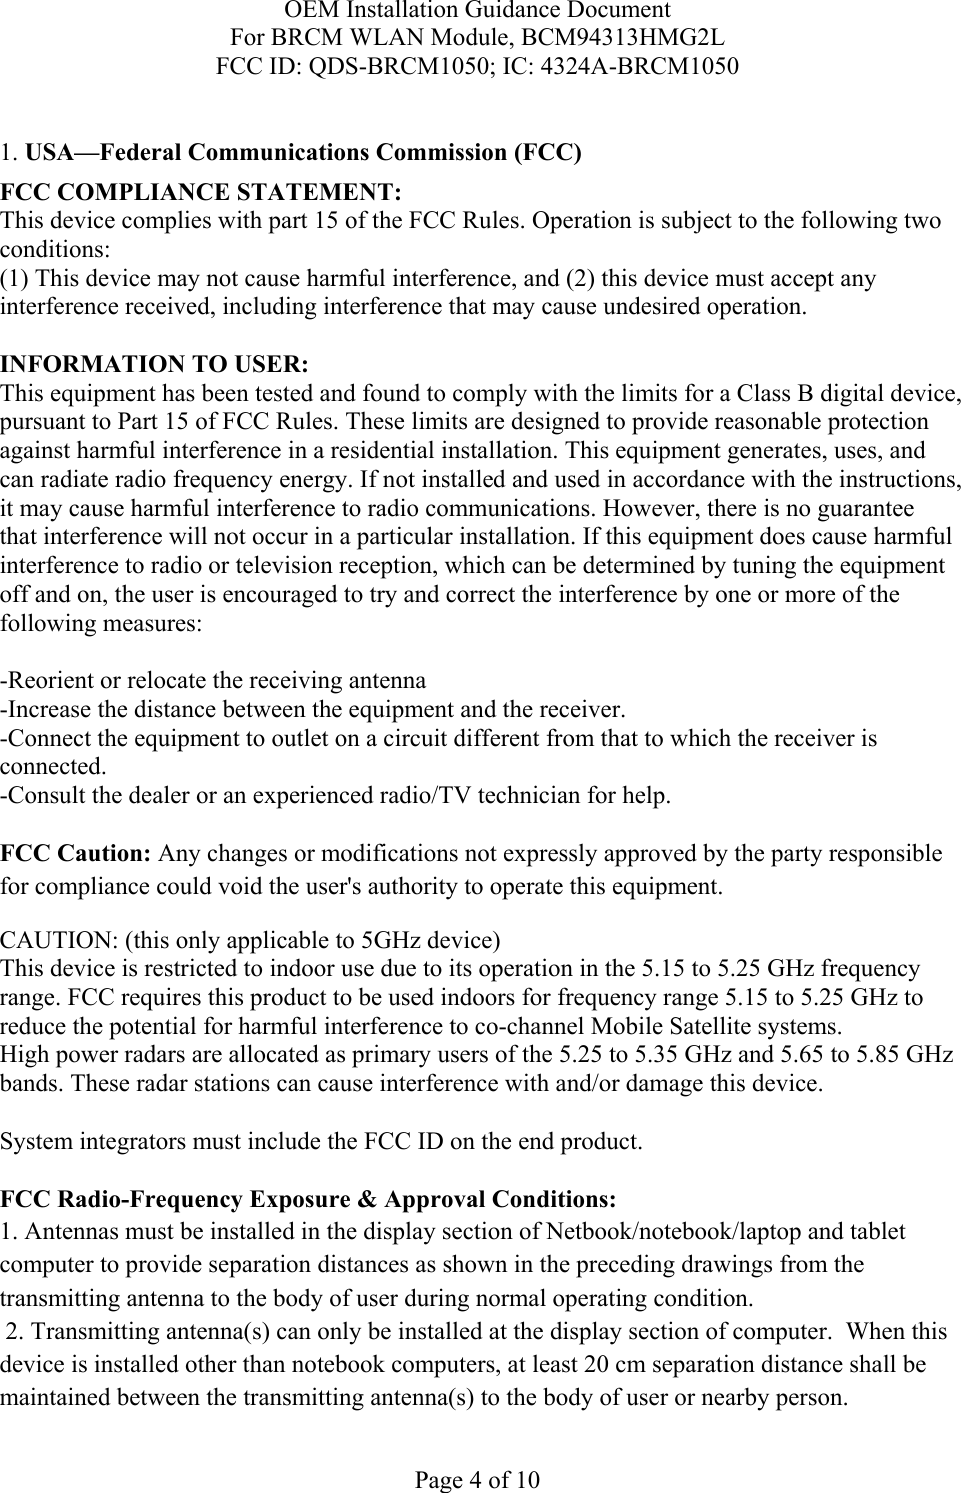 OEM Installation Guidance Document For BRCM WLAN Module, BCM94313HMG2L FCC ID: QDS-BRCM1050; IC: 4324A-BRCM1050  Page 4 of 10  1. USA—Federal Communications Commission (FCC) FCC COMPLIANCE STATEMENT: This device complies with part 15 of the FCC Rules. Operation is subject to the following two conditions: (1) This device may not cause harmful interference, and (2) this device must accept any interference received, including interference that may cause undesired operation.  INFORMATION TO USER: This equipment has been tested and found to comply with the limits for a Class B digital device, pursuant to Part 15 of FCC Rules. These limits are designed to provide reasonable protection against harmful interference in a residential installation. This equipment generates, uses, and can radiate radio frequency energy. If not installed and used in accordance with the instructions, it may cause harmful interference to radio communications. However, there is no guarantee that interference will not occur in a particular installation. If this equipment does cause harmful interference to radio or television reception, which can be determined by tuning the equipment off and on, the user is encouraged to try and correct the interference by one or more of the following measures:    -Reorient or relocate the receiving antenna -Increase the distance between the equipment and the receiver. -Connect the equipment to outlet on a circuit different from that to which the receiver is connected. -Consult the dealer or an experienced radio/TV technician for help.  FCC Caution: Any changes or modifications not expressly approved by the party responsible for compliance could void the user&apos;s authority to operate this equipment. CAUTION: (this only applicable to 5GHz device) This device is restricted to indoor use due to its operation in the 5.15 to 5.25 GHz frequency range. FCC requires this product to be used indoors for frequency range 5.15 to 5.25 GHz to reduce the potential for harmful interference to co-channel Mobile Satellite systems. High power radars are allocated as primary users of the 5.25 to 5.35 GHz and 5.65 to 5.85 GHz bands. These radar stations can cause interference with and/or damage this device.  System integrators must include the FCC ID on the end product.   FCC Radio-Frequency Exposure &amp; Approval Conditions: 1. Antennas must be installed in the display section of Netbook/notebook/laptop and tablet computer to provide separation distances as shown in the preceding drawings from the transmitting antenna to the body of user during normal operating condition.  2. Transmitting antenna(s) can only be installed at the display section of computer.  When this device is installed other than notebook computers, at least 20 cm separation distance shall be maintained between the transmitting antenna(s) to the body of user or nearby person. 